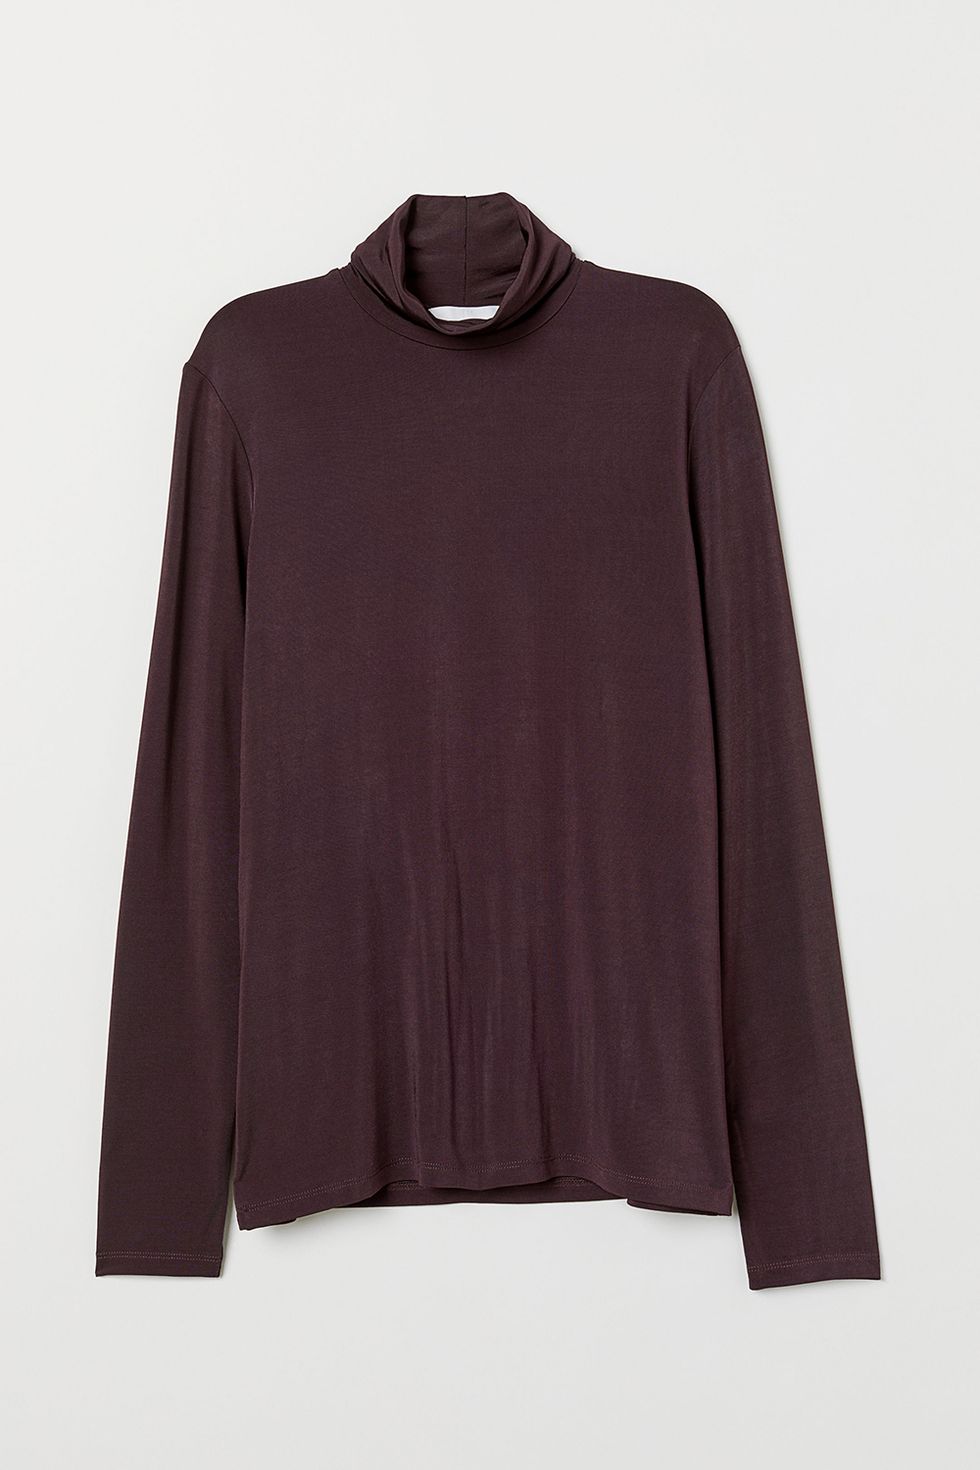 Clothing, Sleeve, Outerwear, Maroon, Blouse, Long-sleeved t-shirt, Neck, T-shirt, Top, Magenta, 